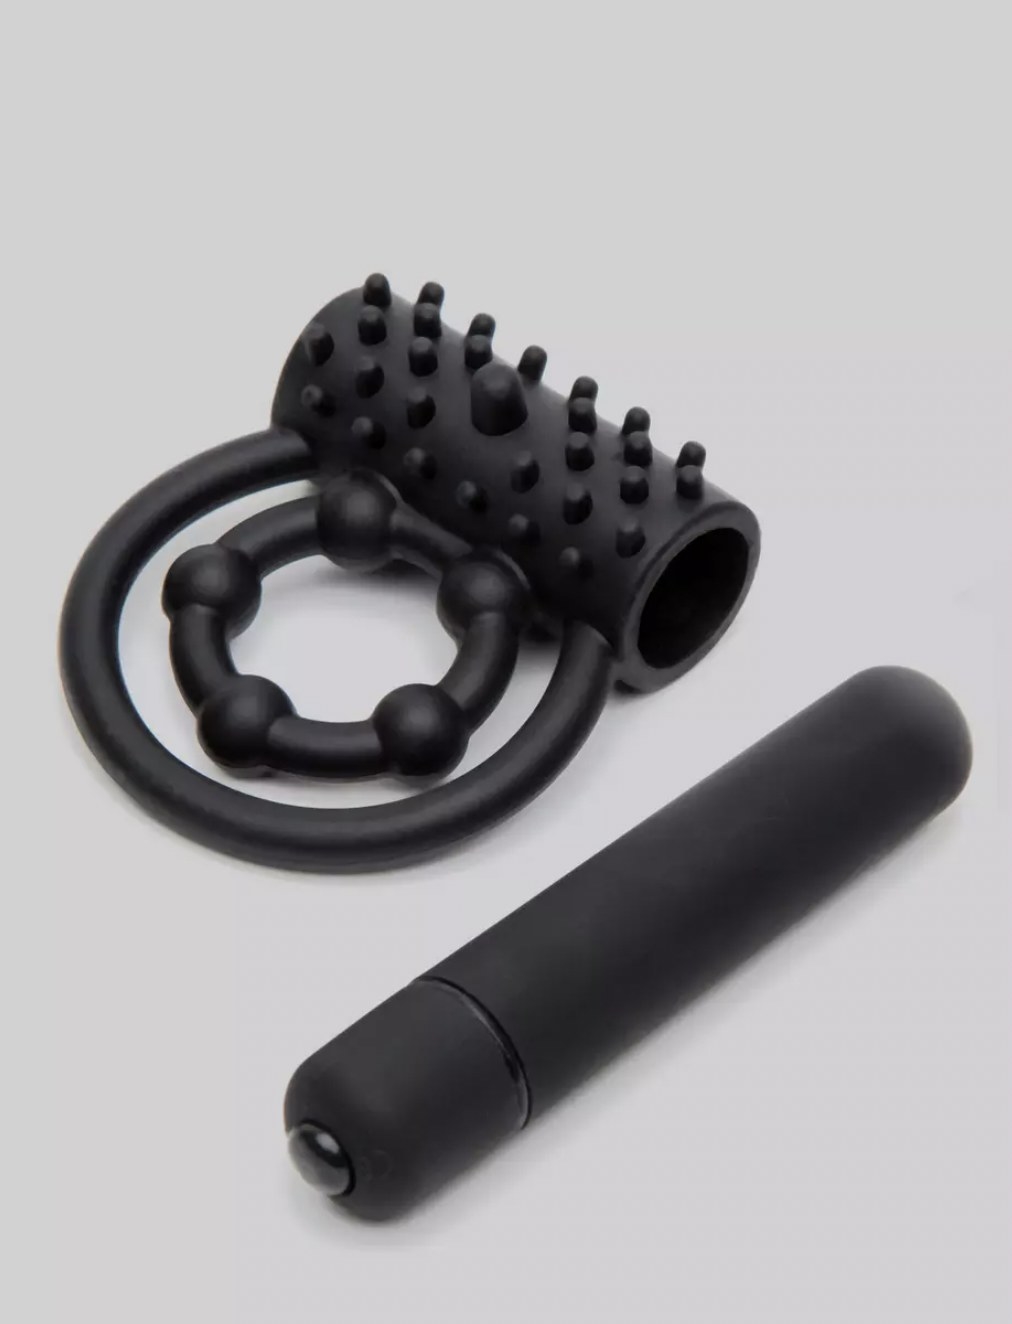 the dual cock ring with bullet vibe removed and laying next to it